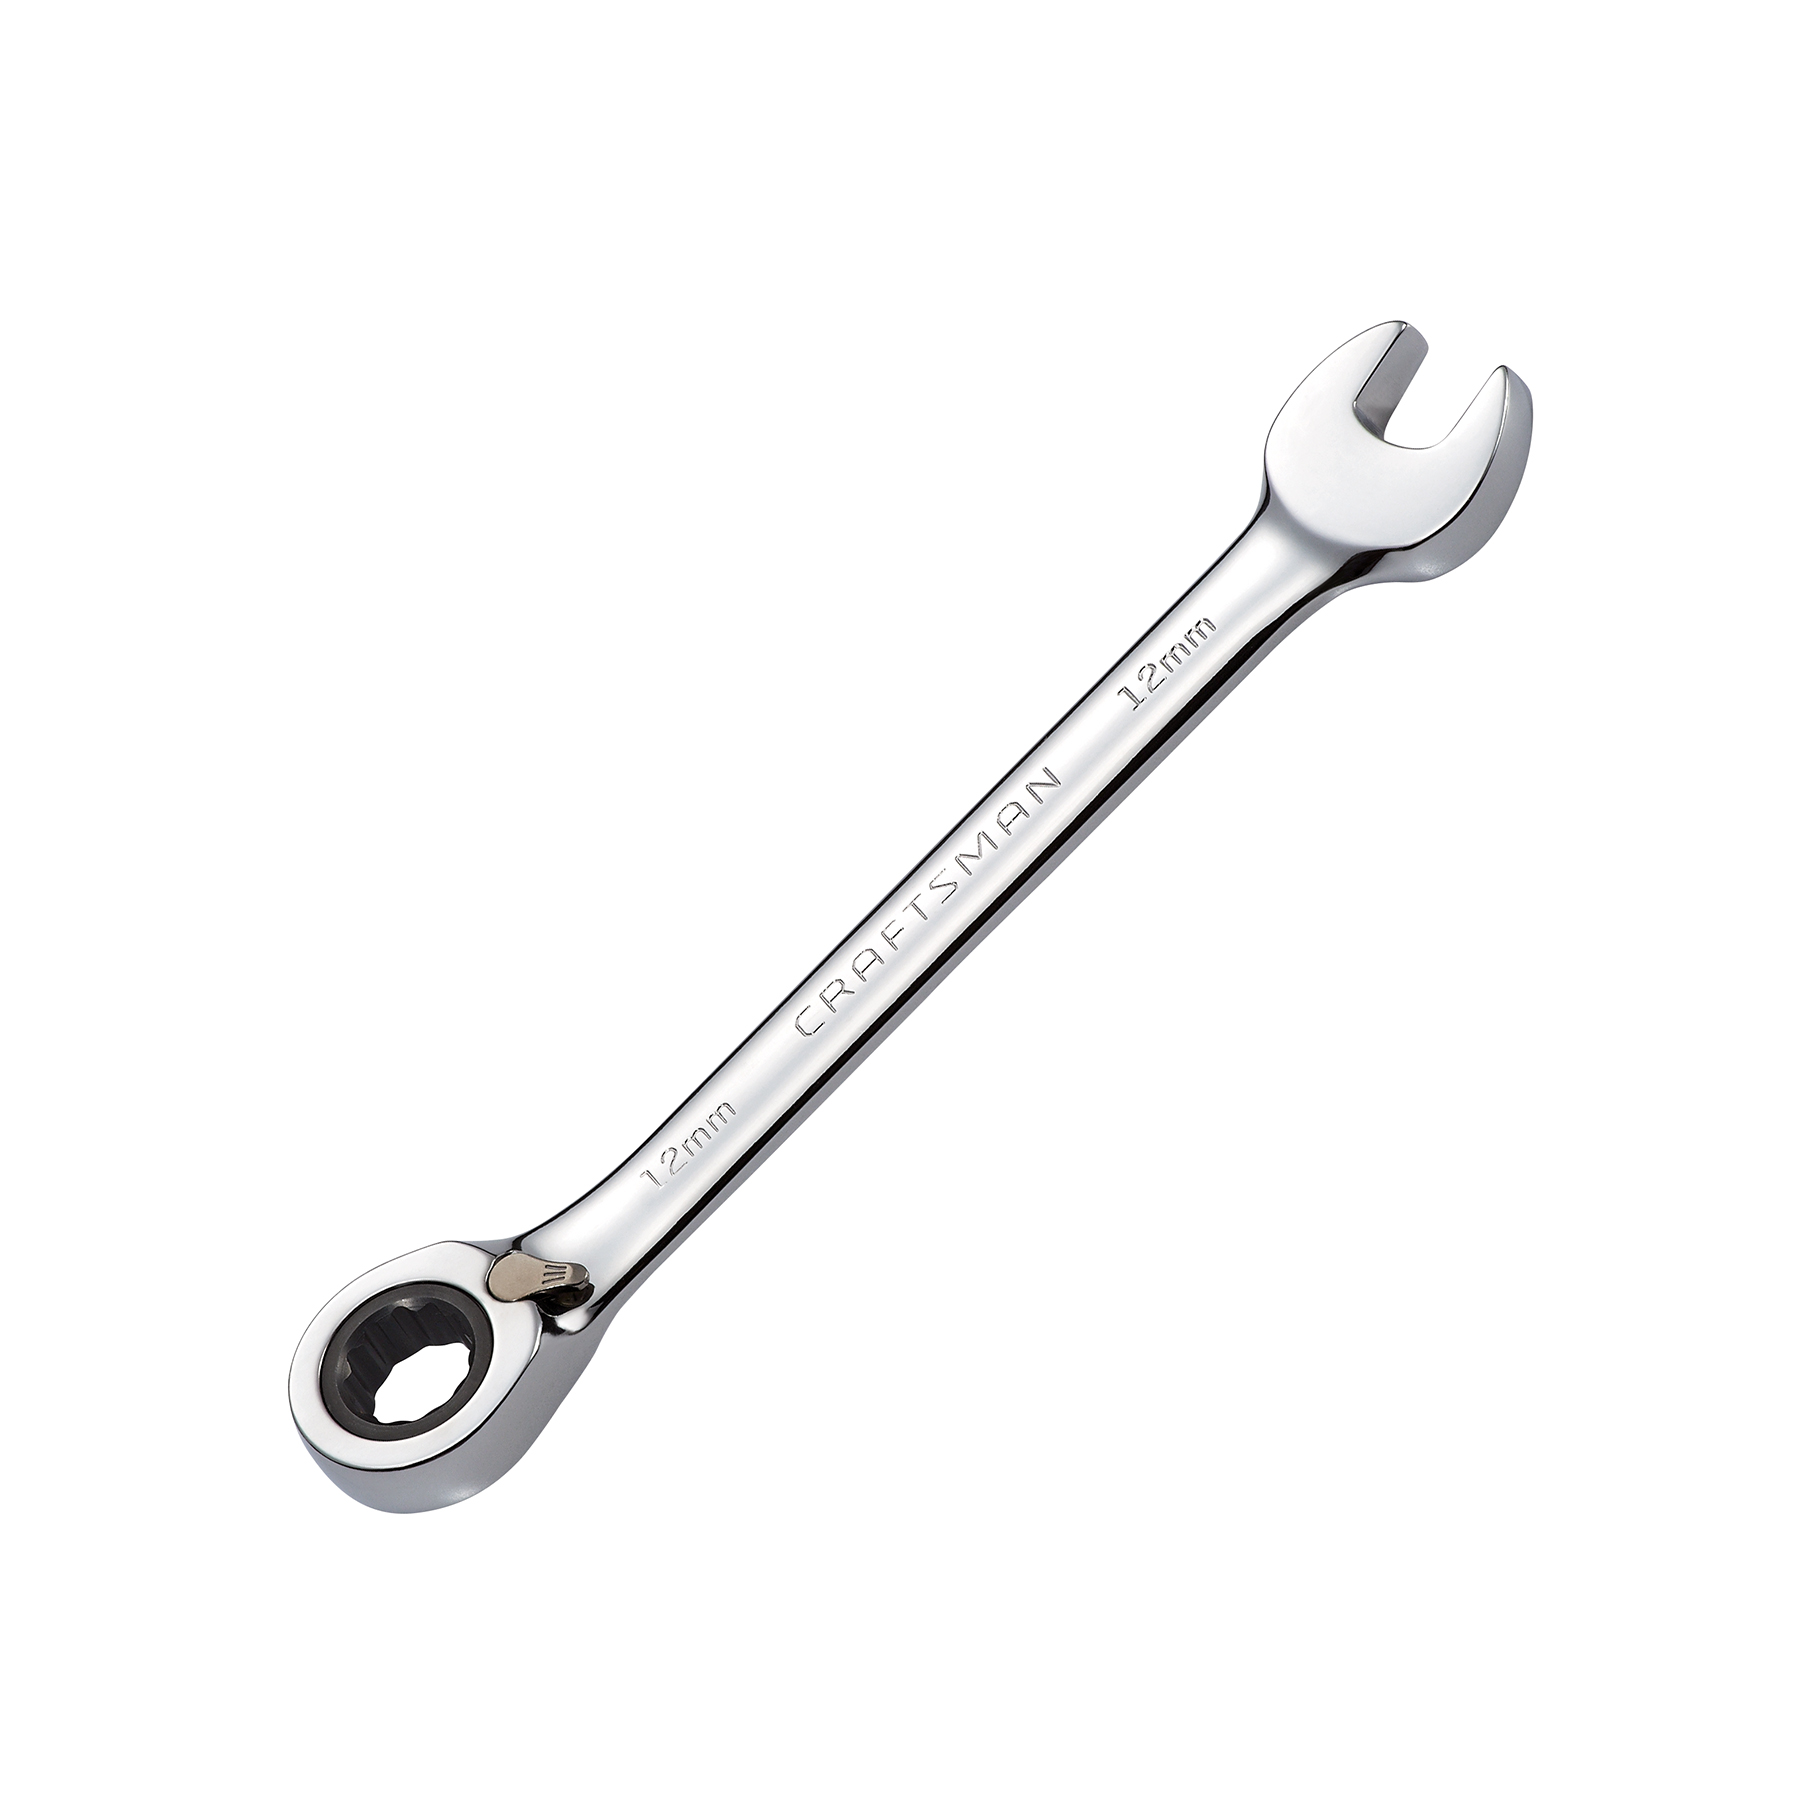 Craftsman 12mm Reversible Ratcheting Combination Wrench